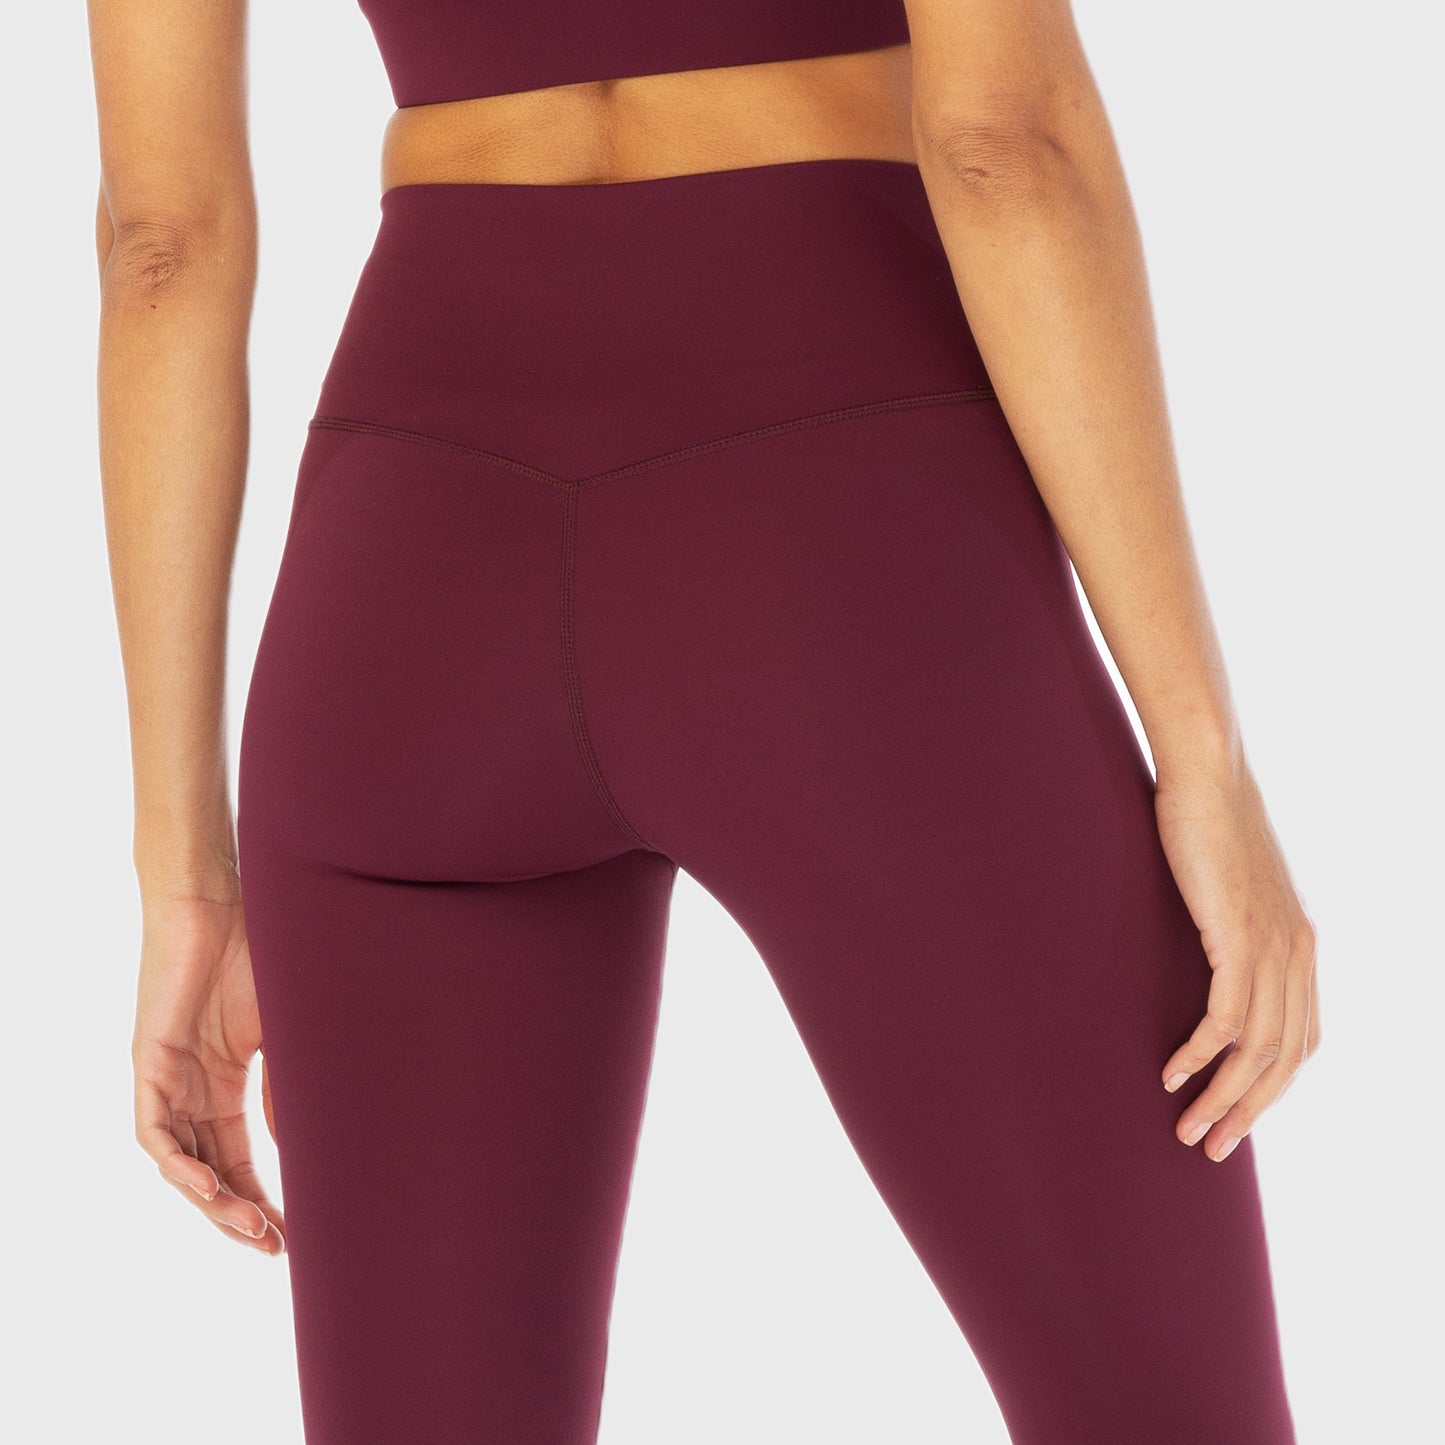 squatwolf-workout-clothes-infinity-cropped-7-8-leggings-grape-leggings-for-women